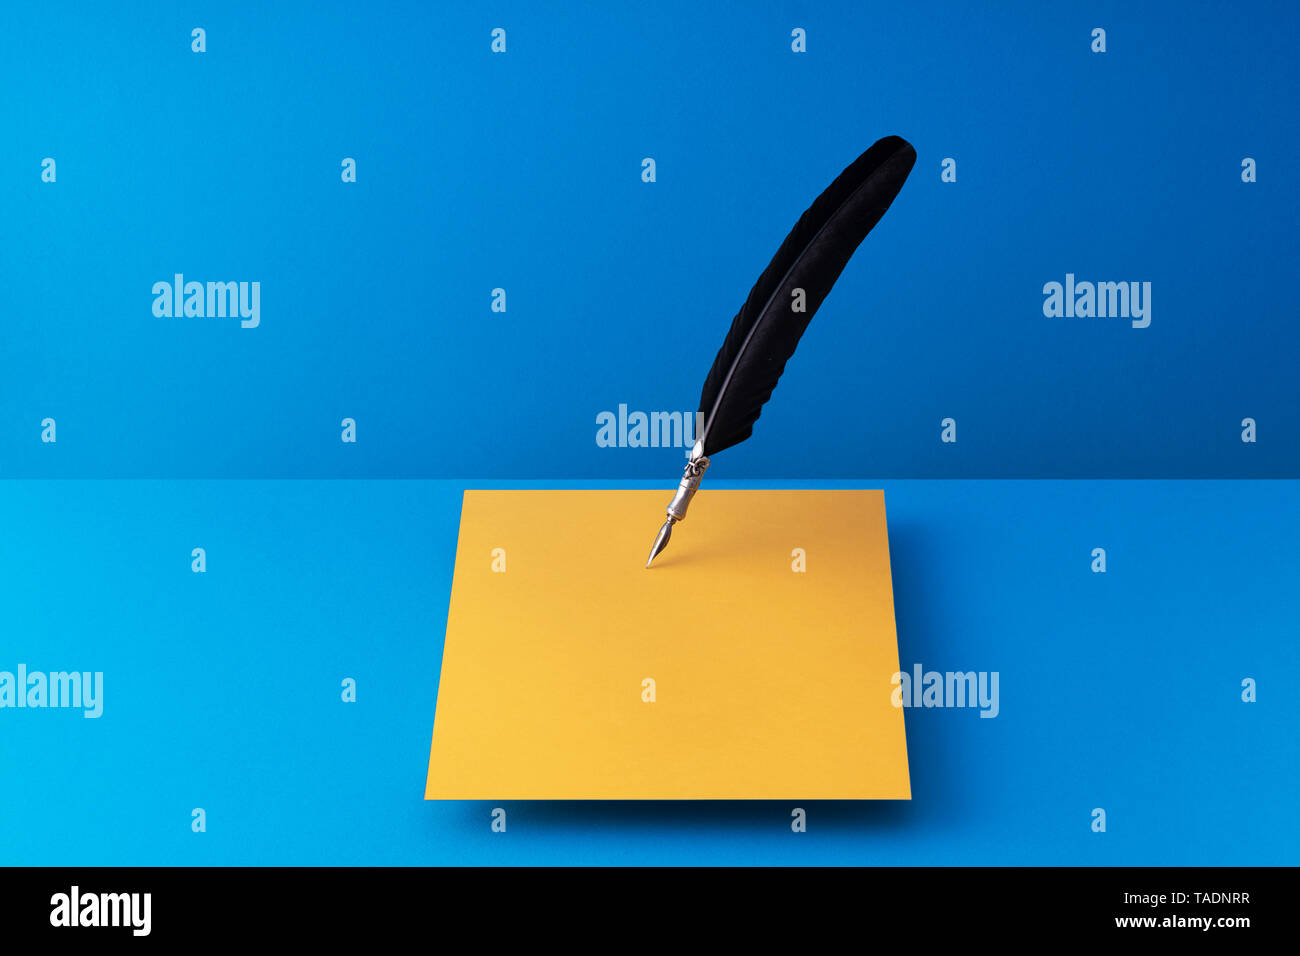 Quill pen writing on orange paper over blue background Stock Photo